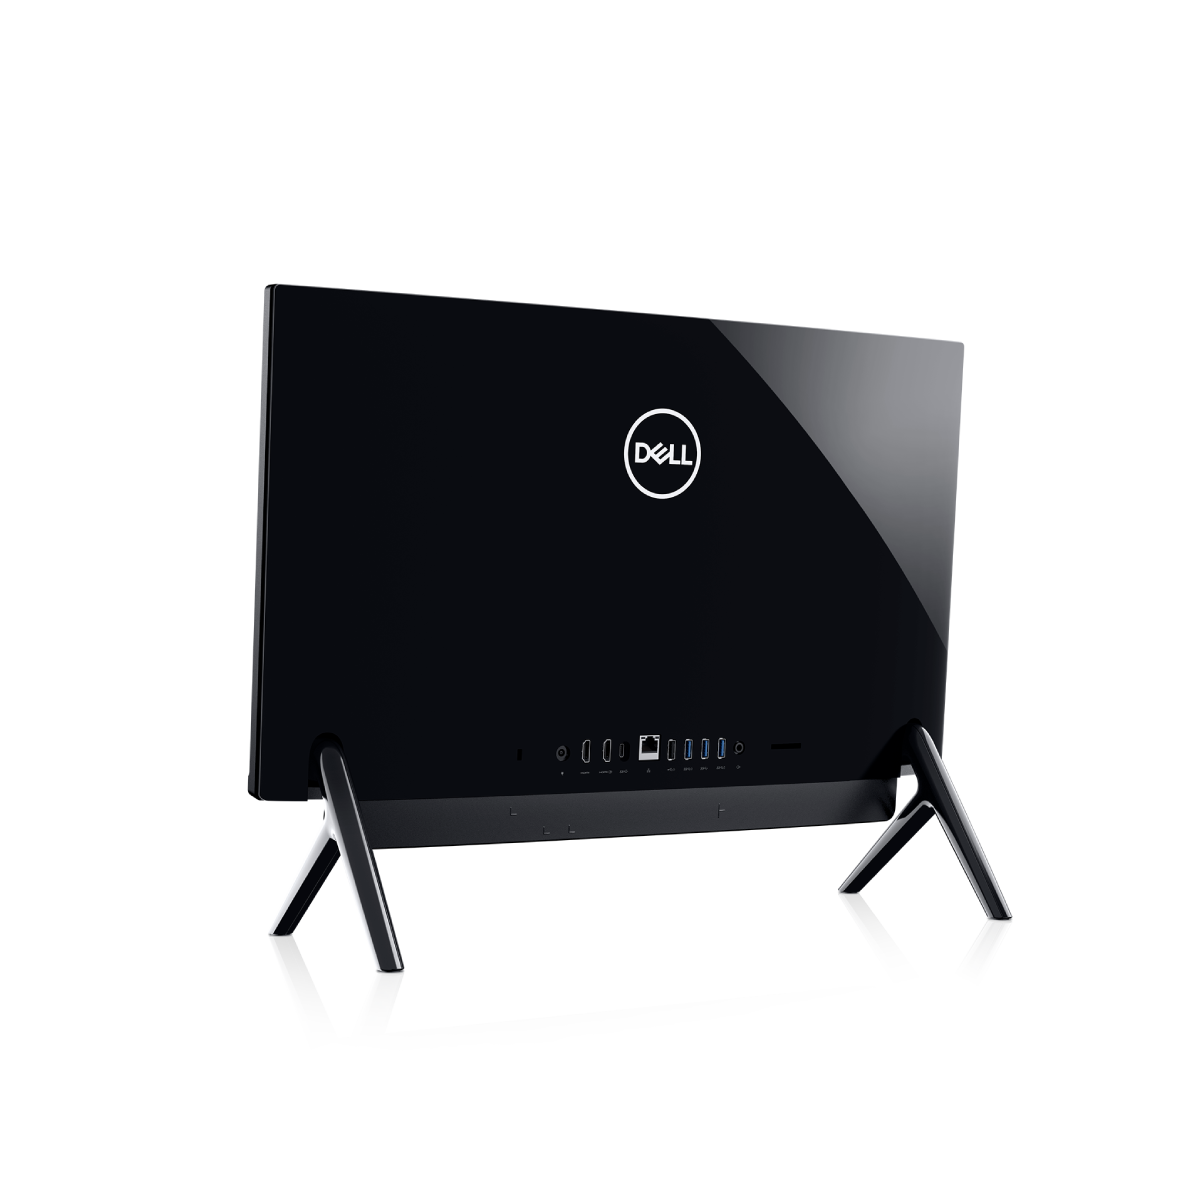 Inspiron 24 5000 All-In-One - Dell Thailand